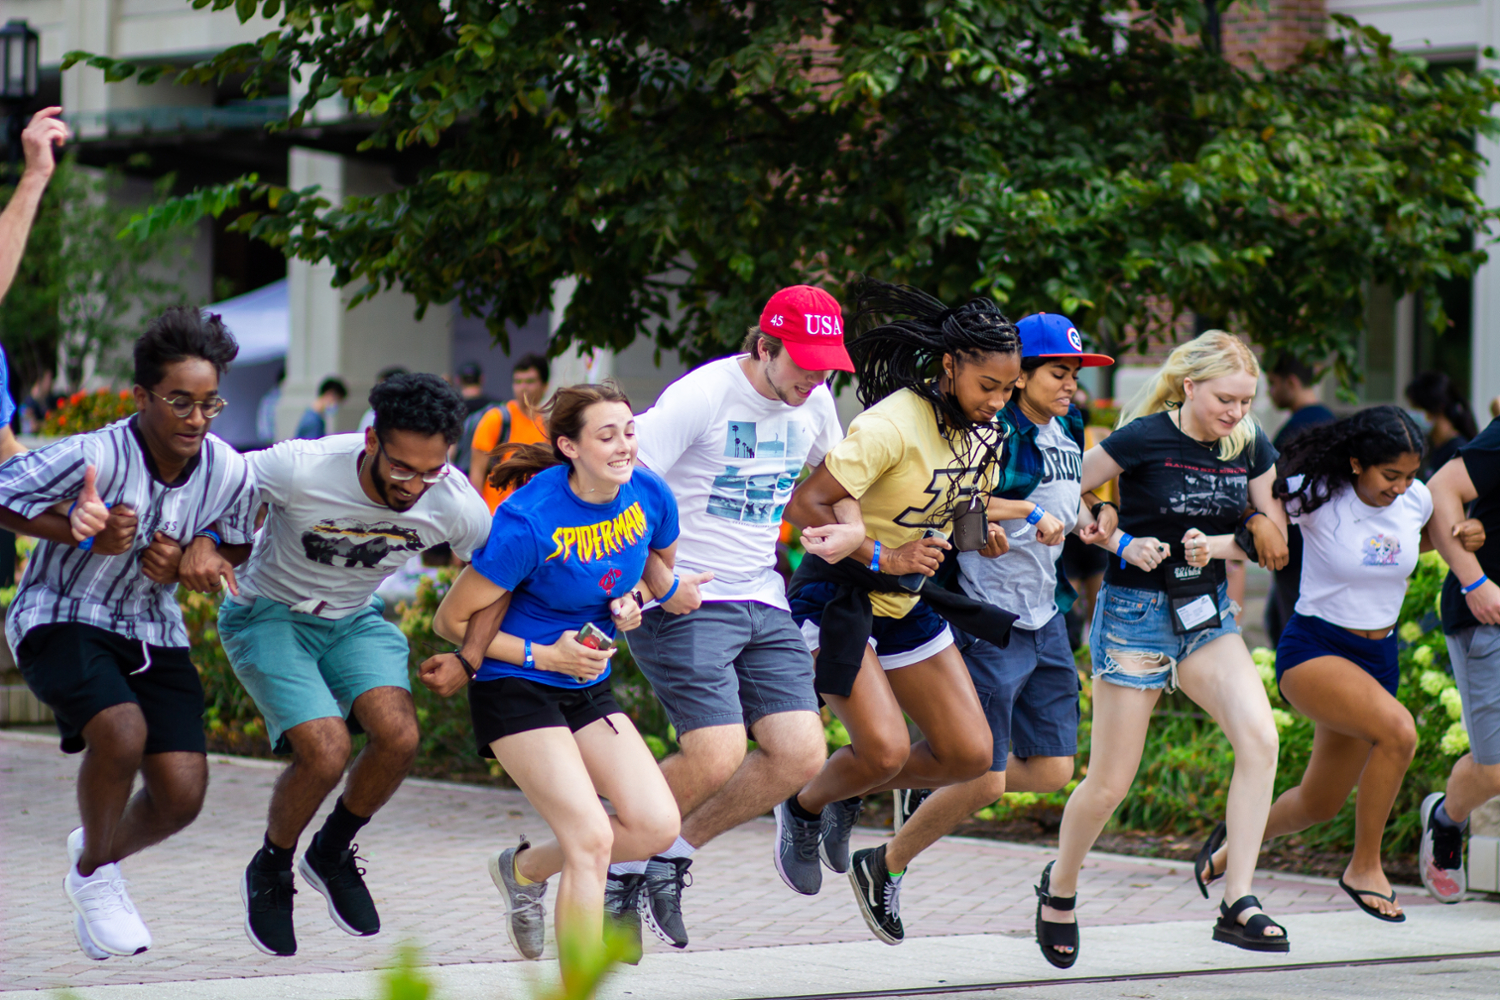 Incoming students participate in the Boiler Gold Rush tradition of jumping over the railroad tracks, signifying their entrance into Purdue University.